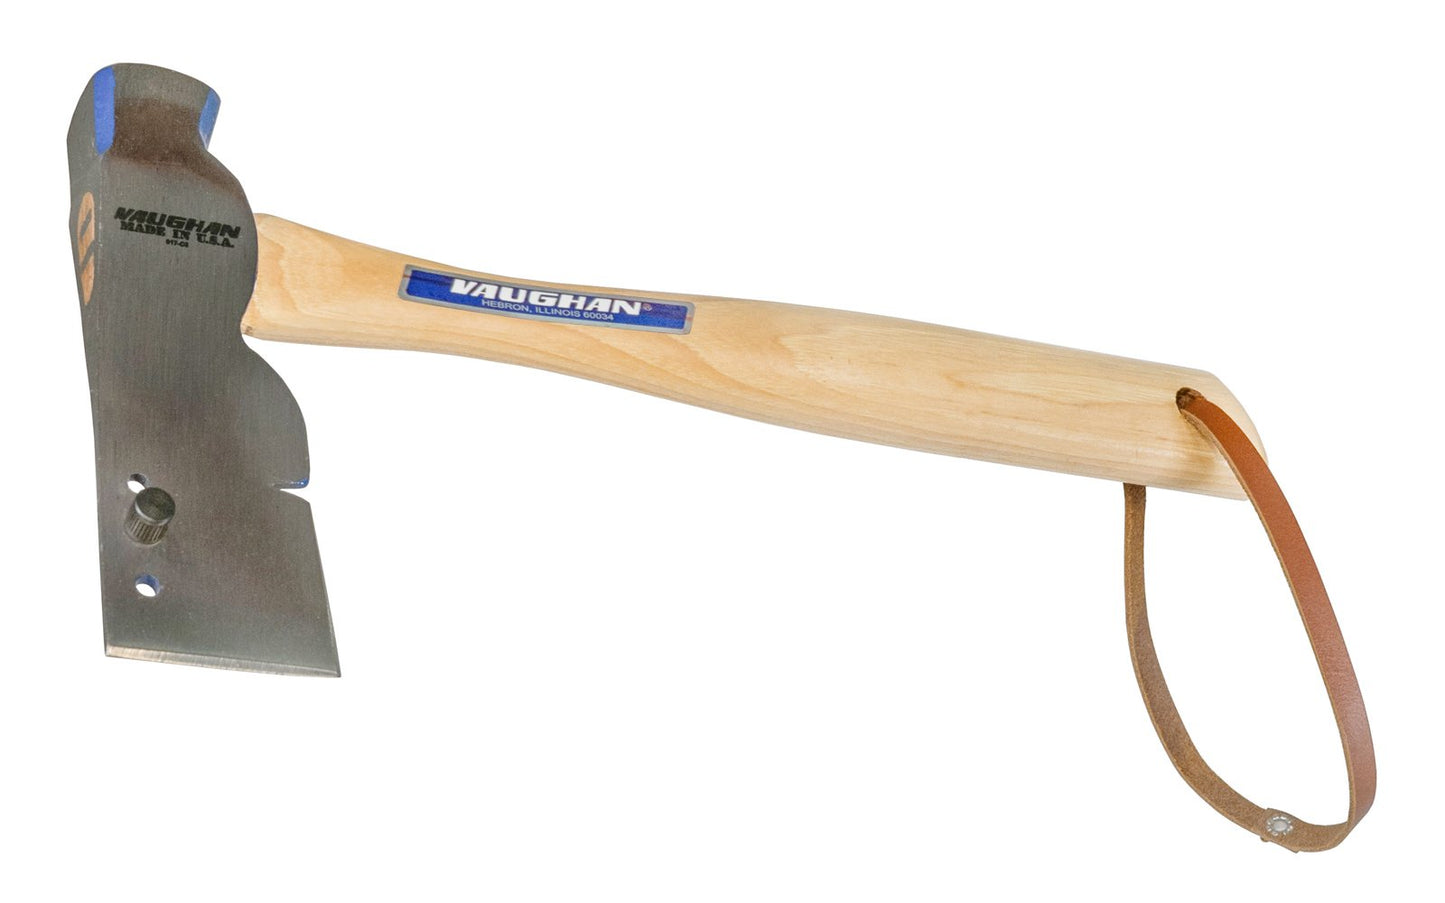 Vaughan Shingle Hatchet - 14 oz ~ SH - Made in USA ~ Vaughan Shingling Hatchet is fully polished with a milled, crowned face, nail slot & back blade - Designed for wooden shingles or shakes - Milled waffle-face & square headed - The 3 gauges on hatchet helps set overhang/exposure of shingles - Hickory Hardwood handle  